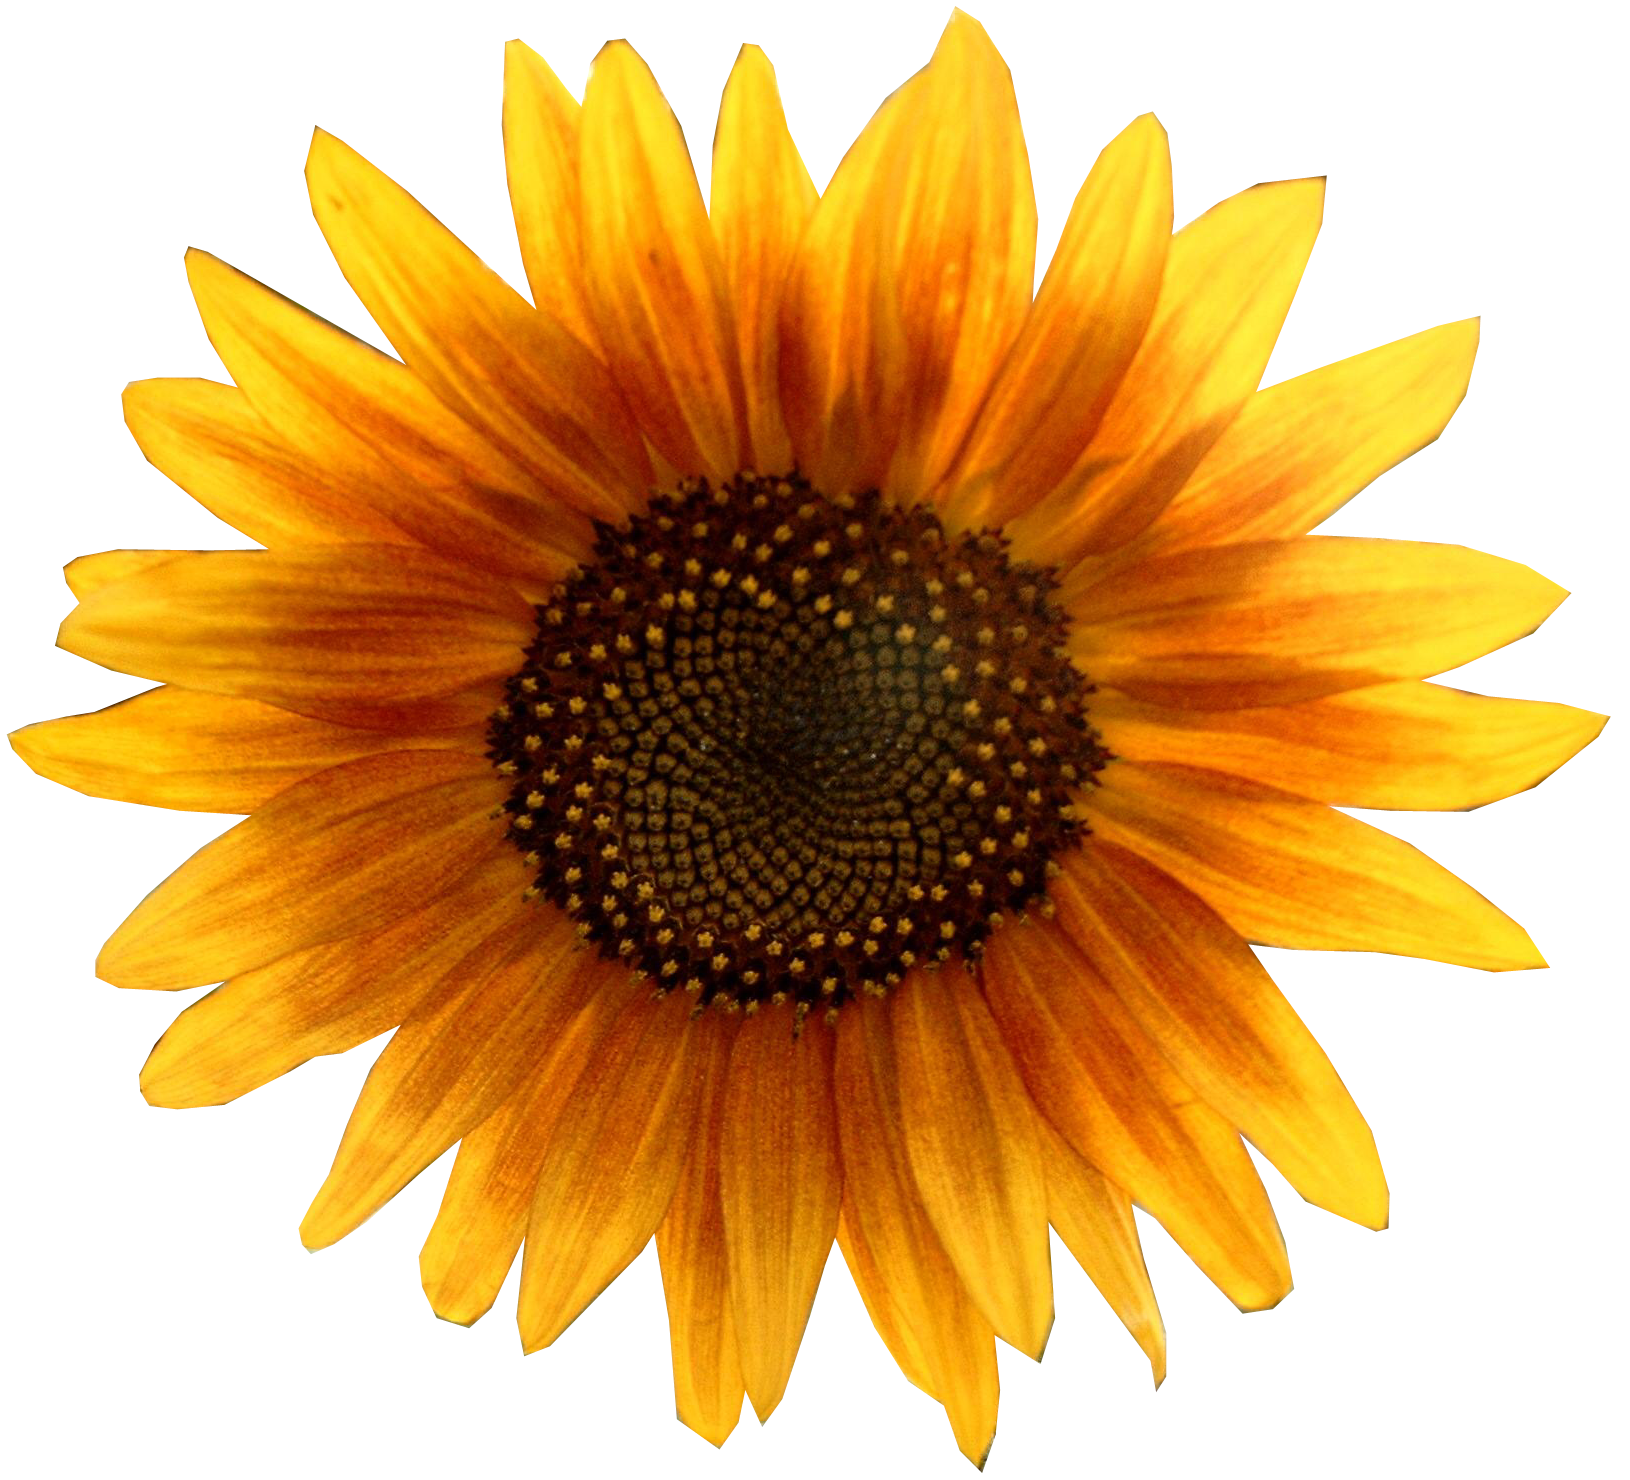 File:A sunflower-Edited.png